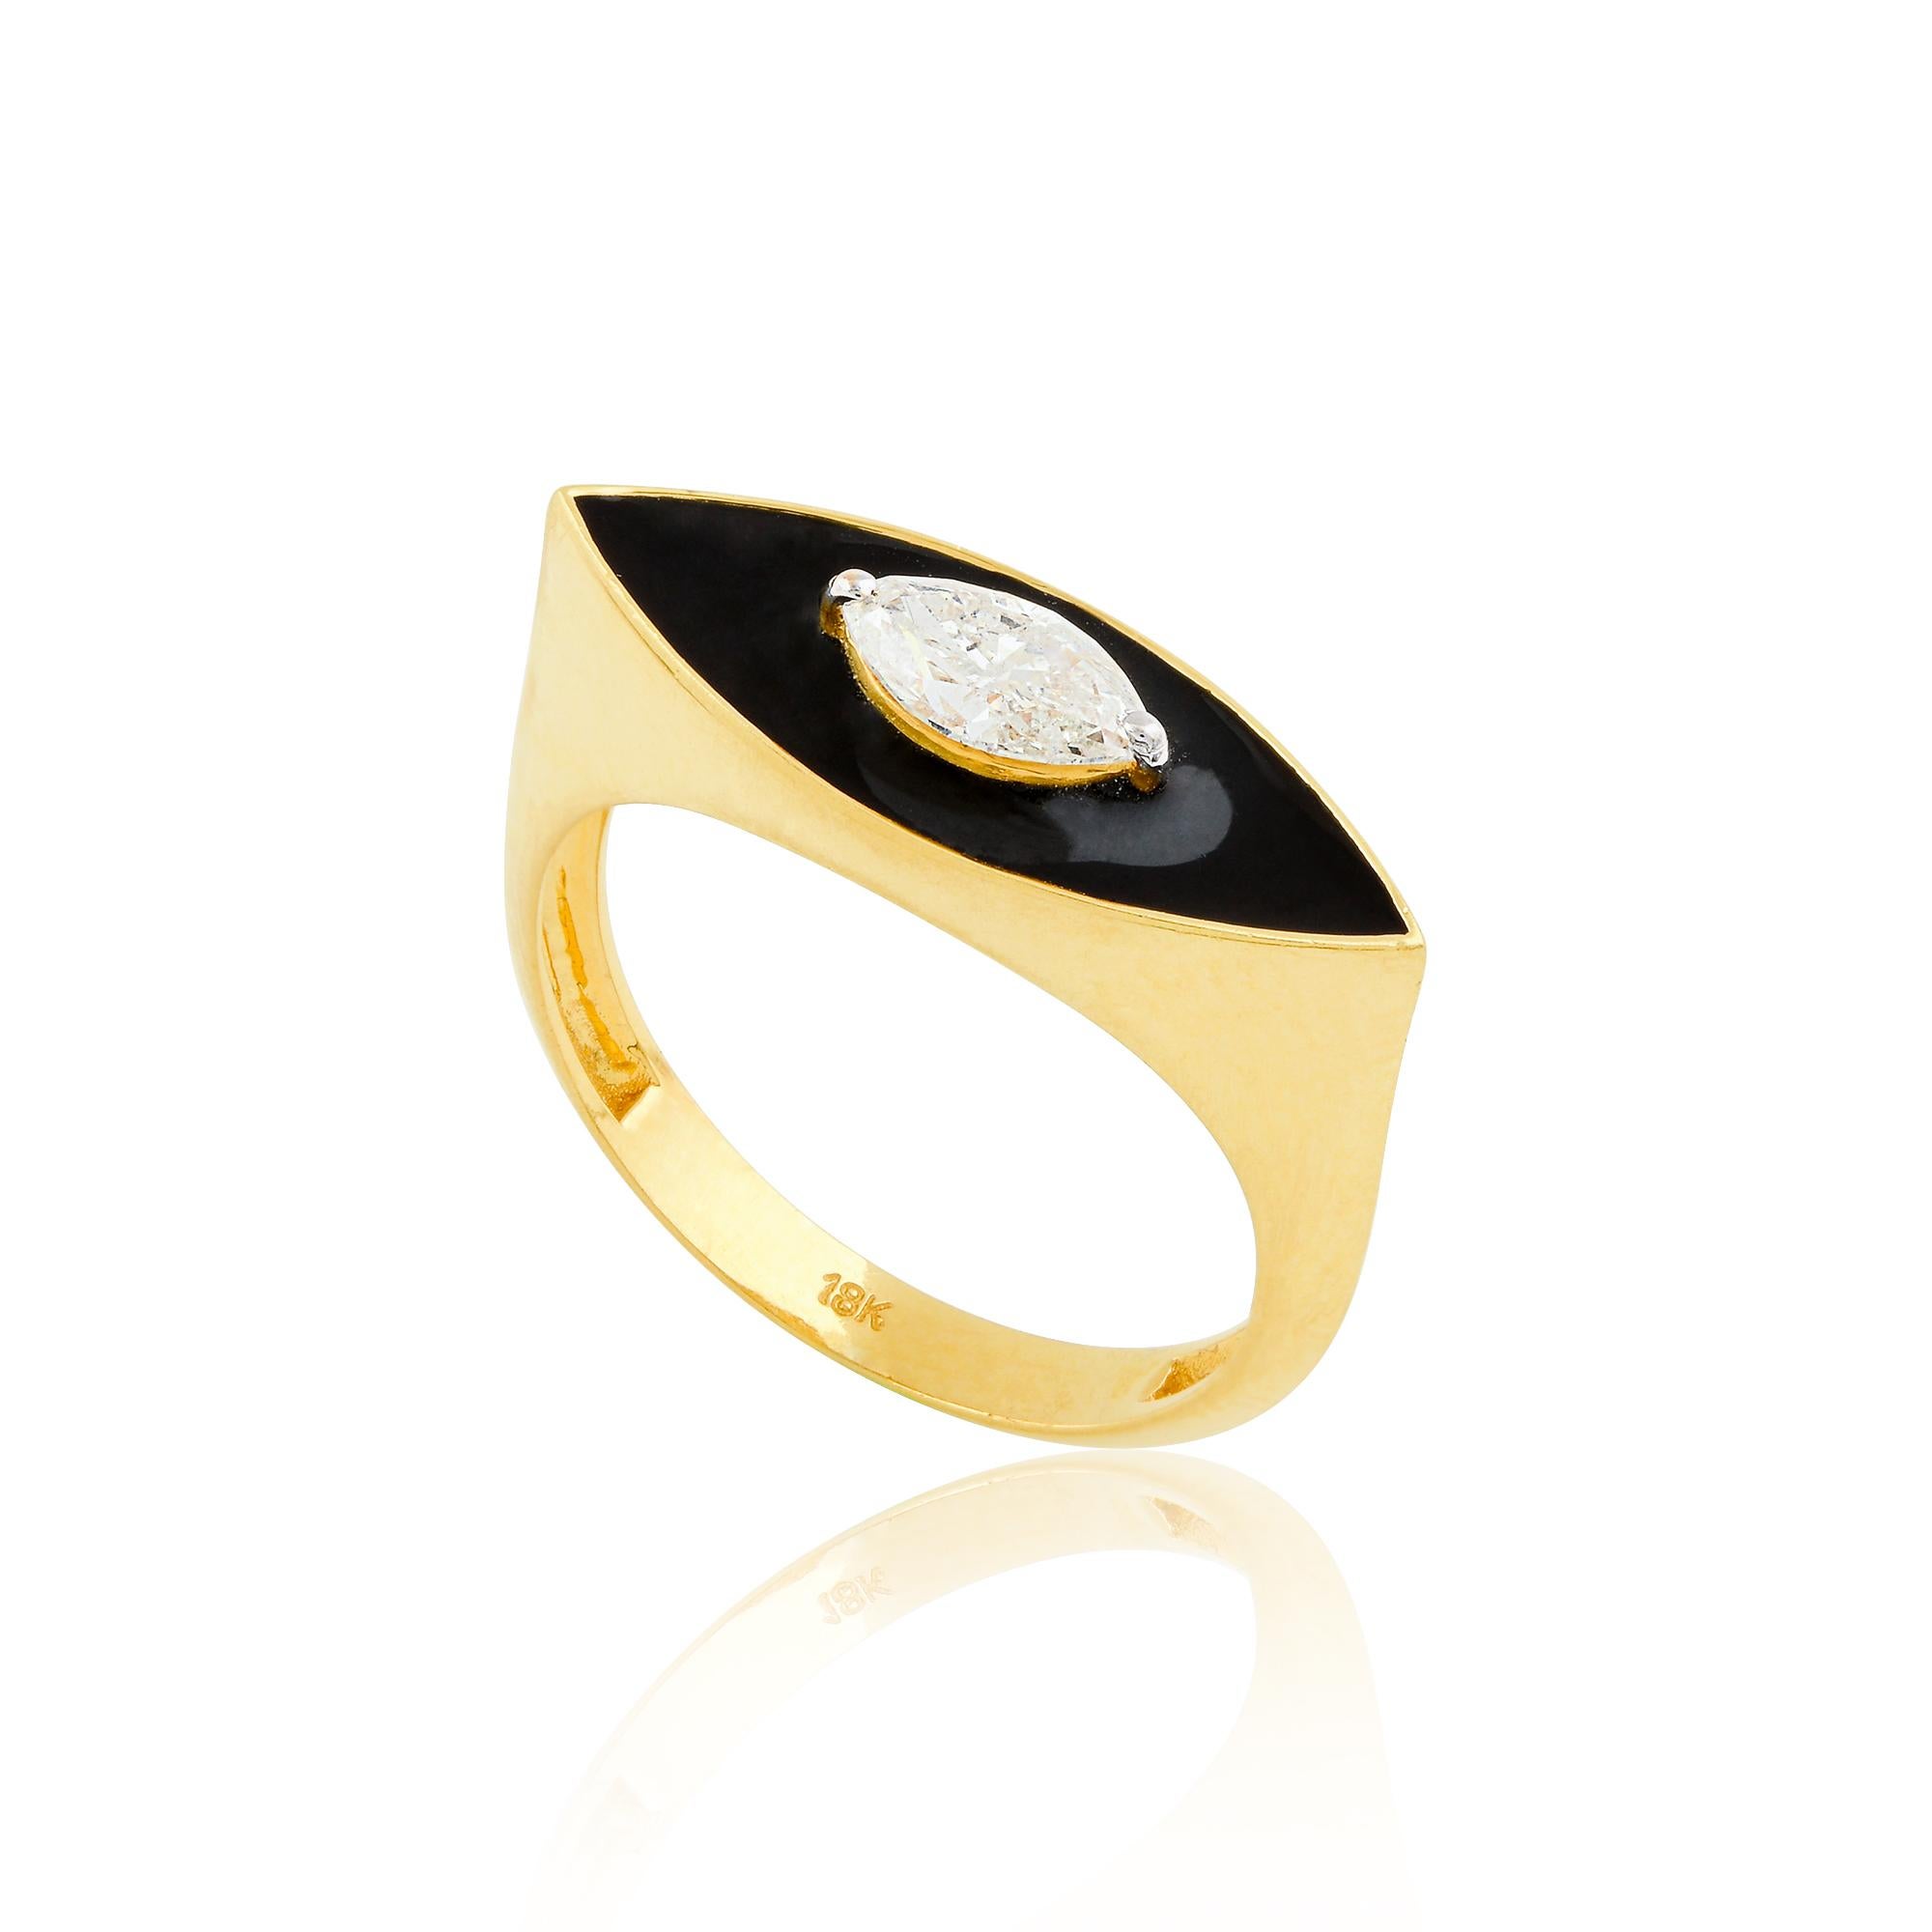 For Sale:  0.45 Ct Solitaire Diamond Evil Eye Ring 18k Yellow Gold Black Enamel Jewelry 5